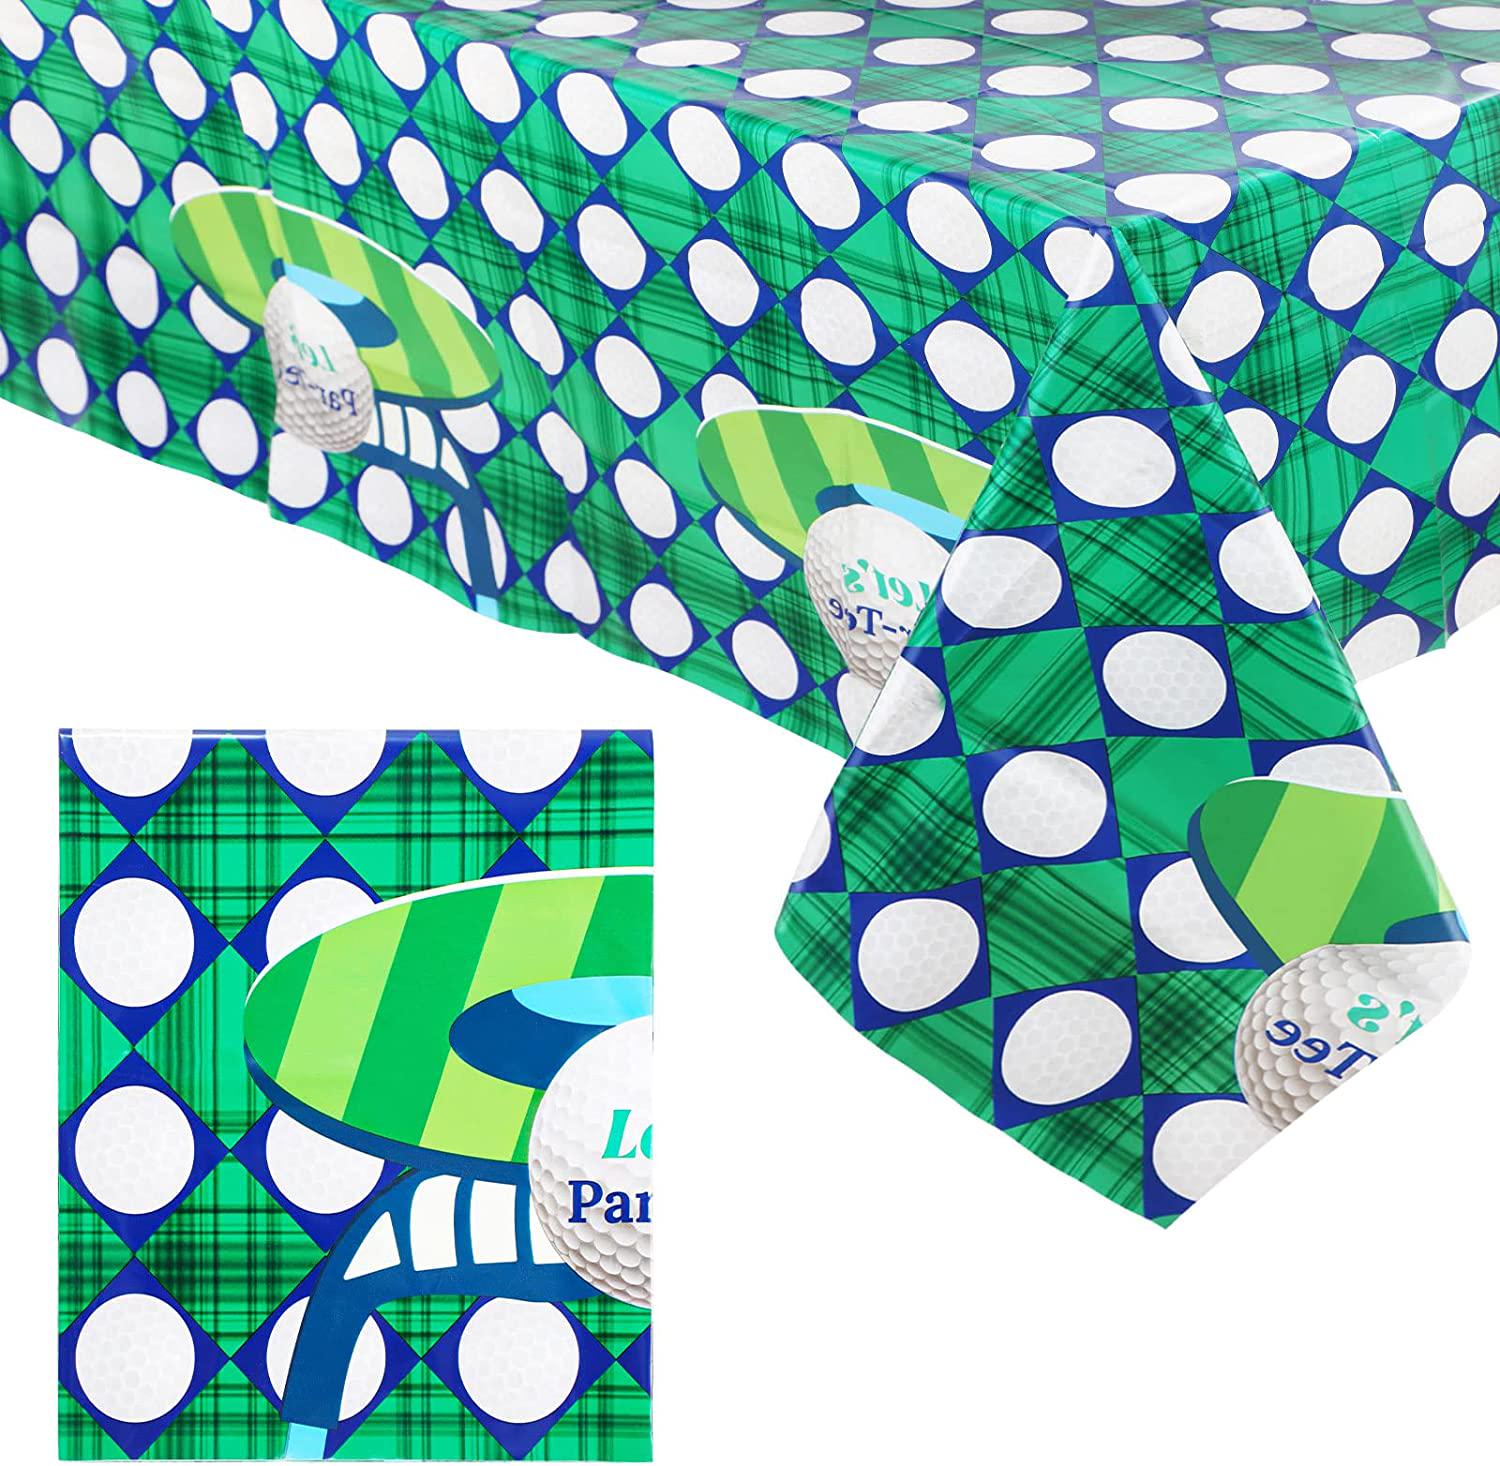 Tatuo, Golf Plastic Rectangle Table Cover Joyful Golf Party Decorations Green Golf Table Cloth Golf Party Table Cover Golf Themed Birthday Party Supplies for Home Office School, 42.5 x 70.9 Inch (1 Piece)